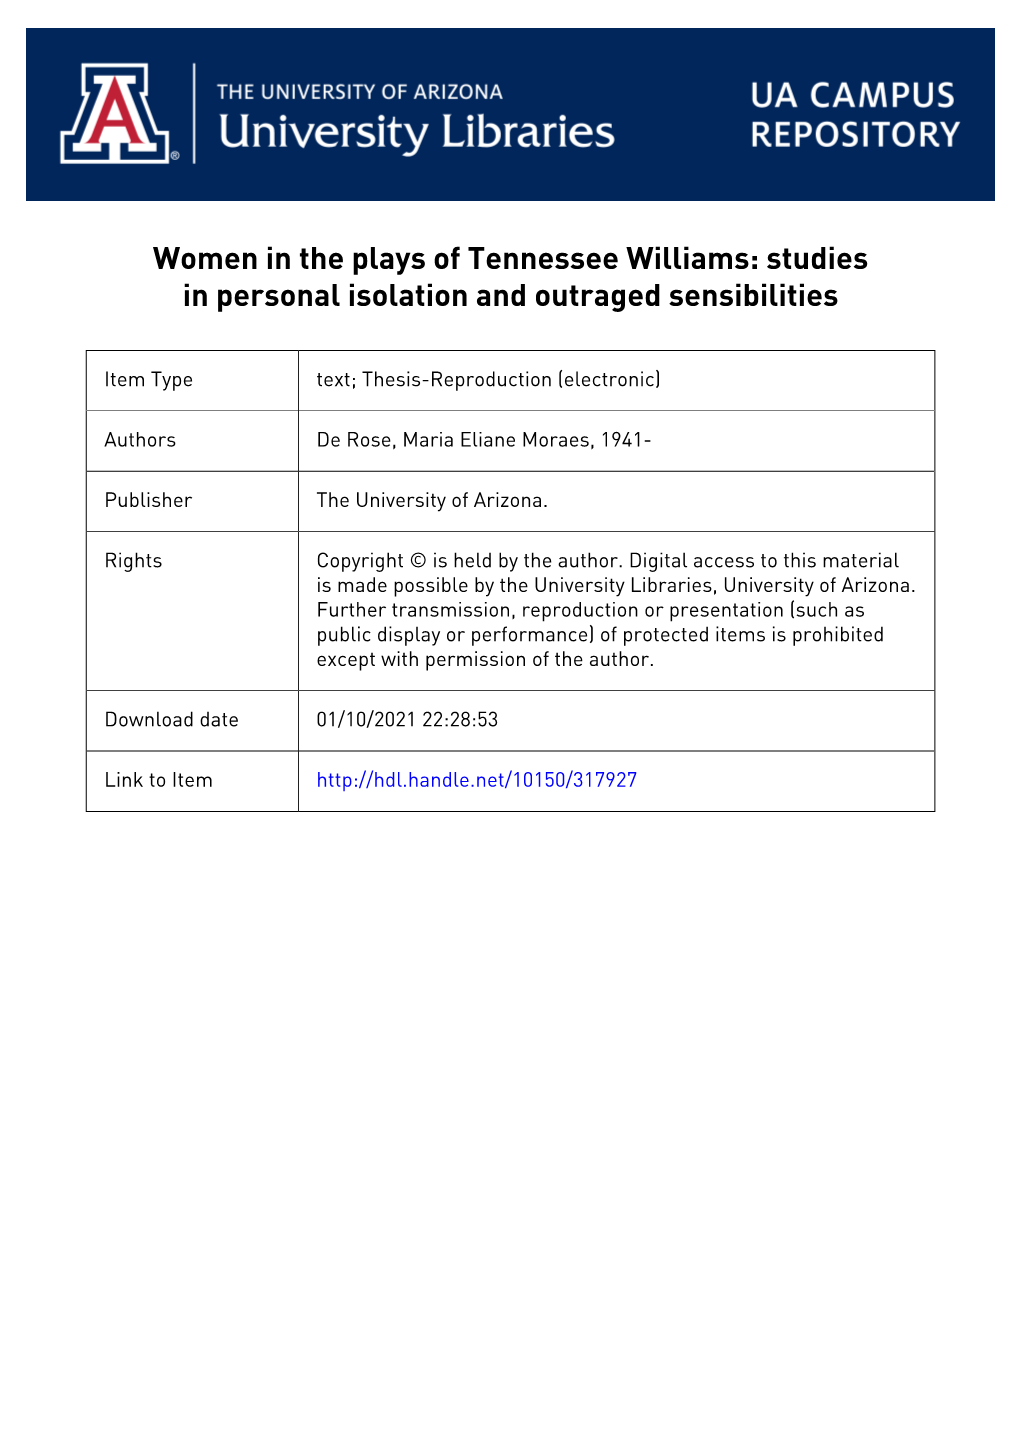 Women in the Plays of Tennessee Williams: Studies in Personal Isolation and Outraged Sensibilities